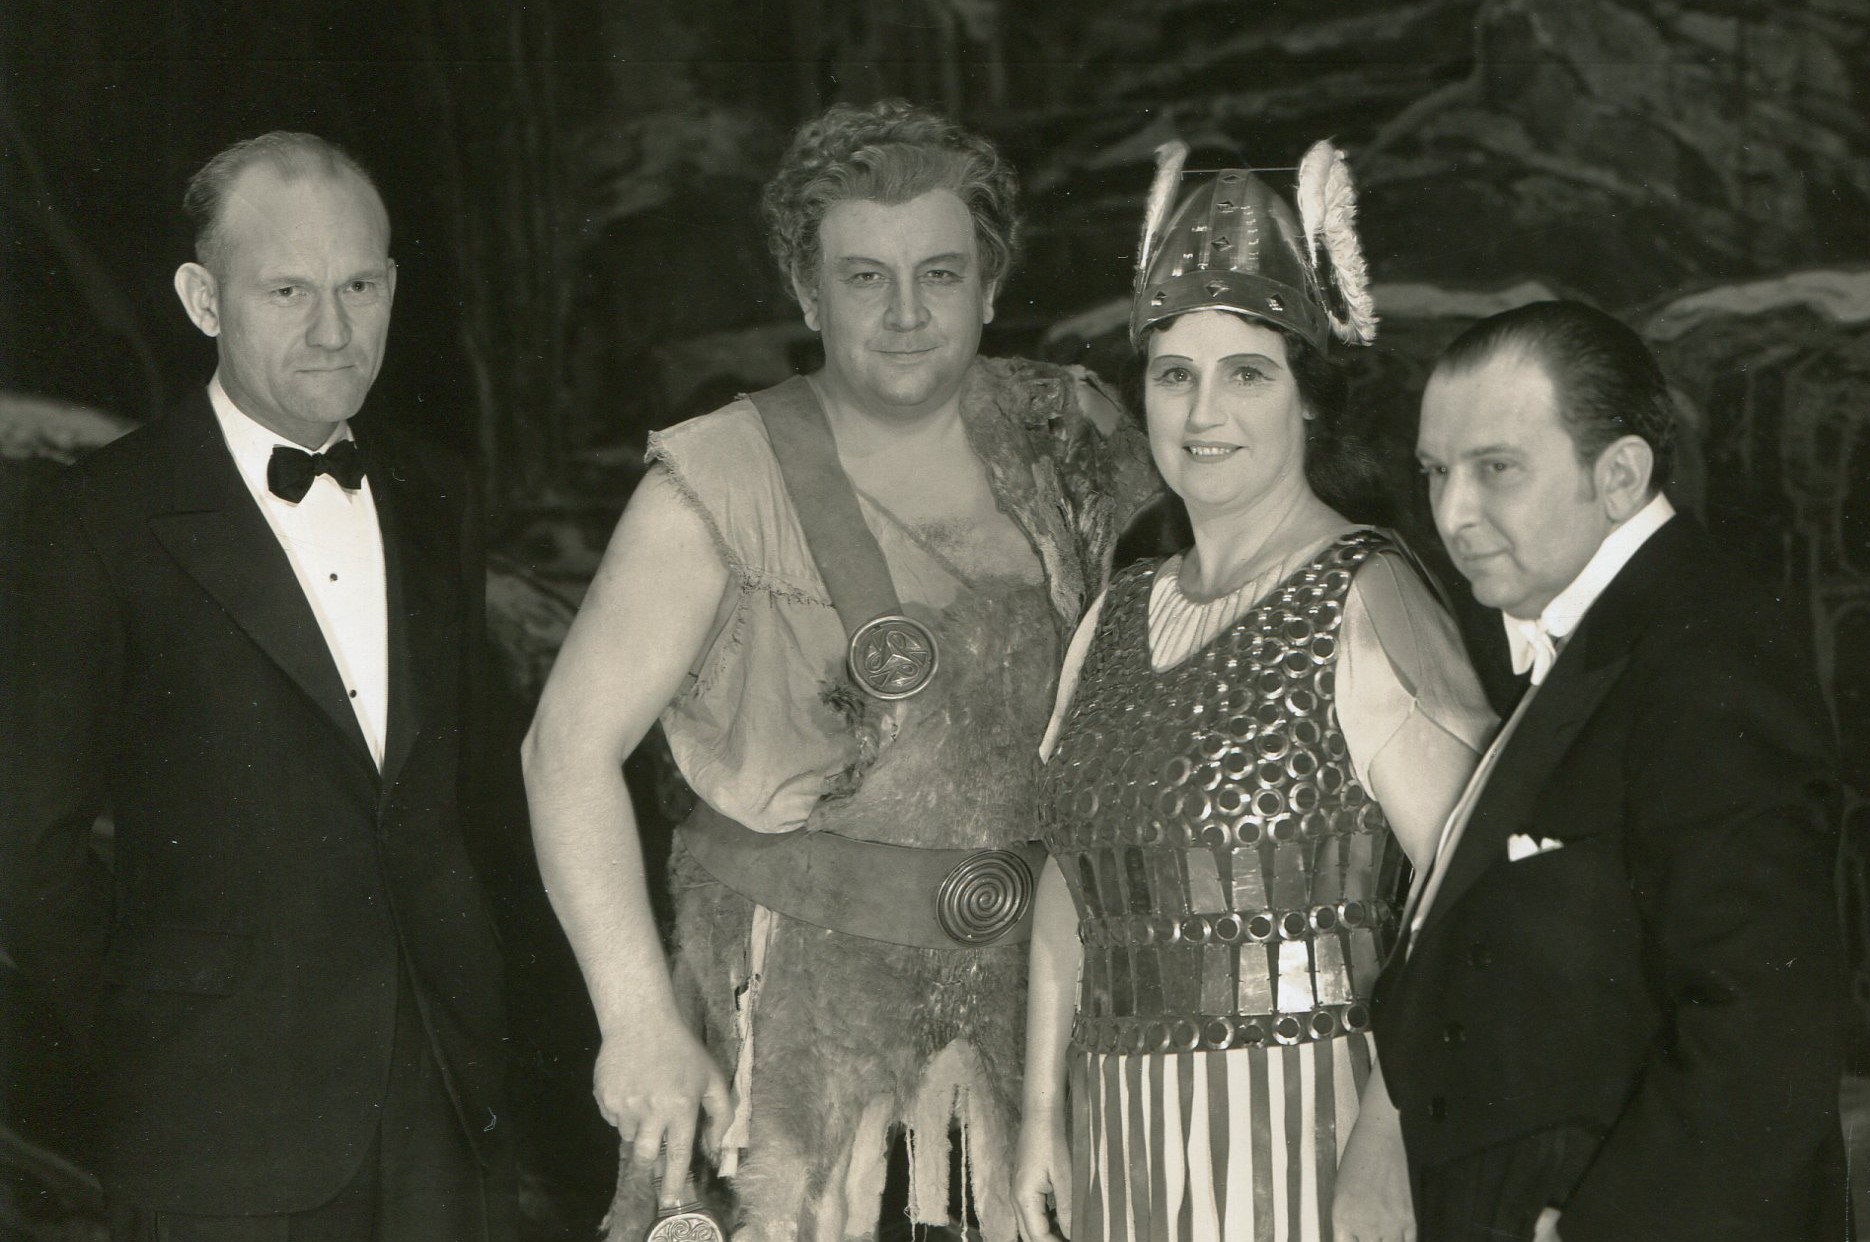 Black and white photo of cast members with Fritz Reiner from Die Walkure 1936